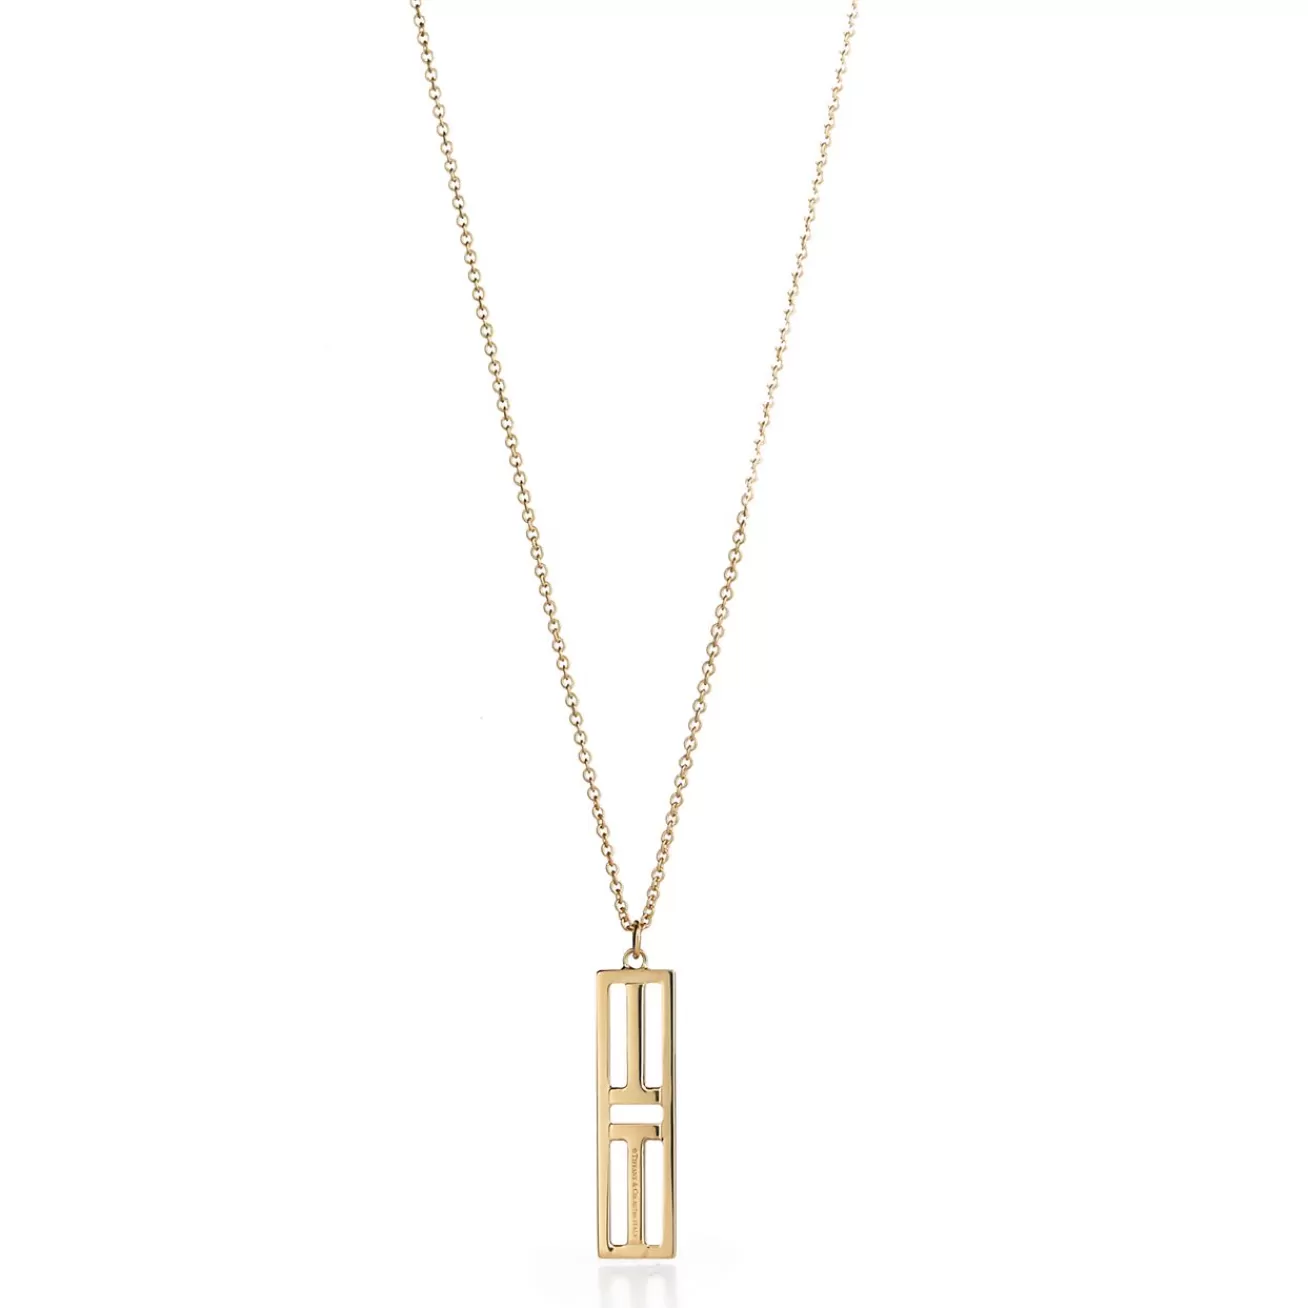 Tiffany & Co. Tiffany T open vertical diamond bar pendant in 18k gold. | ^ Necklaces & Pendants | Gold Jewelry